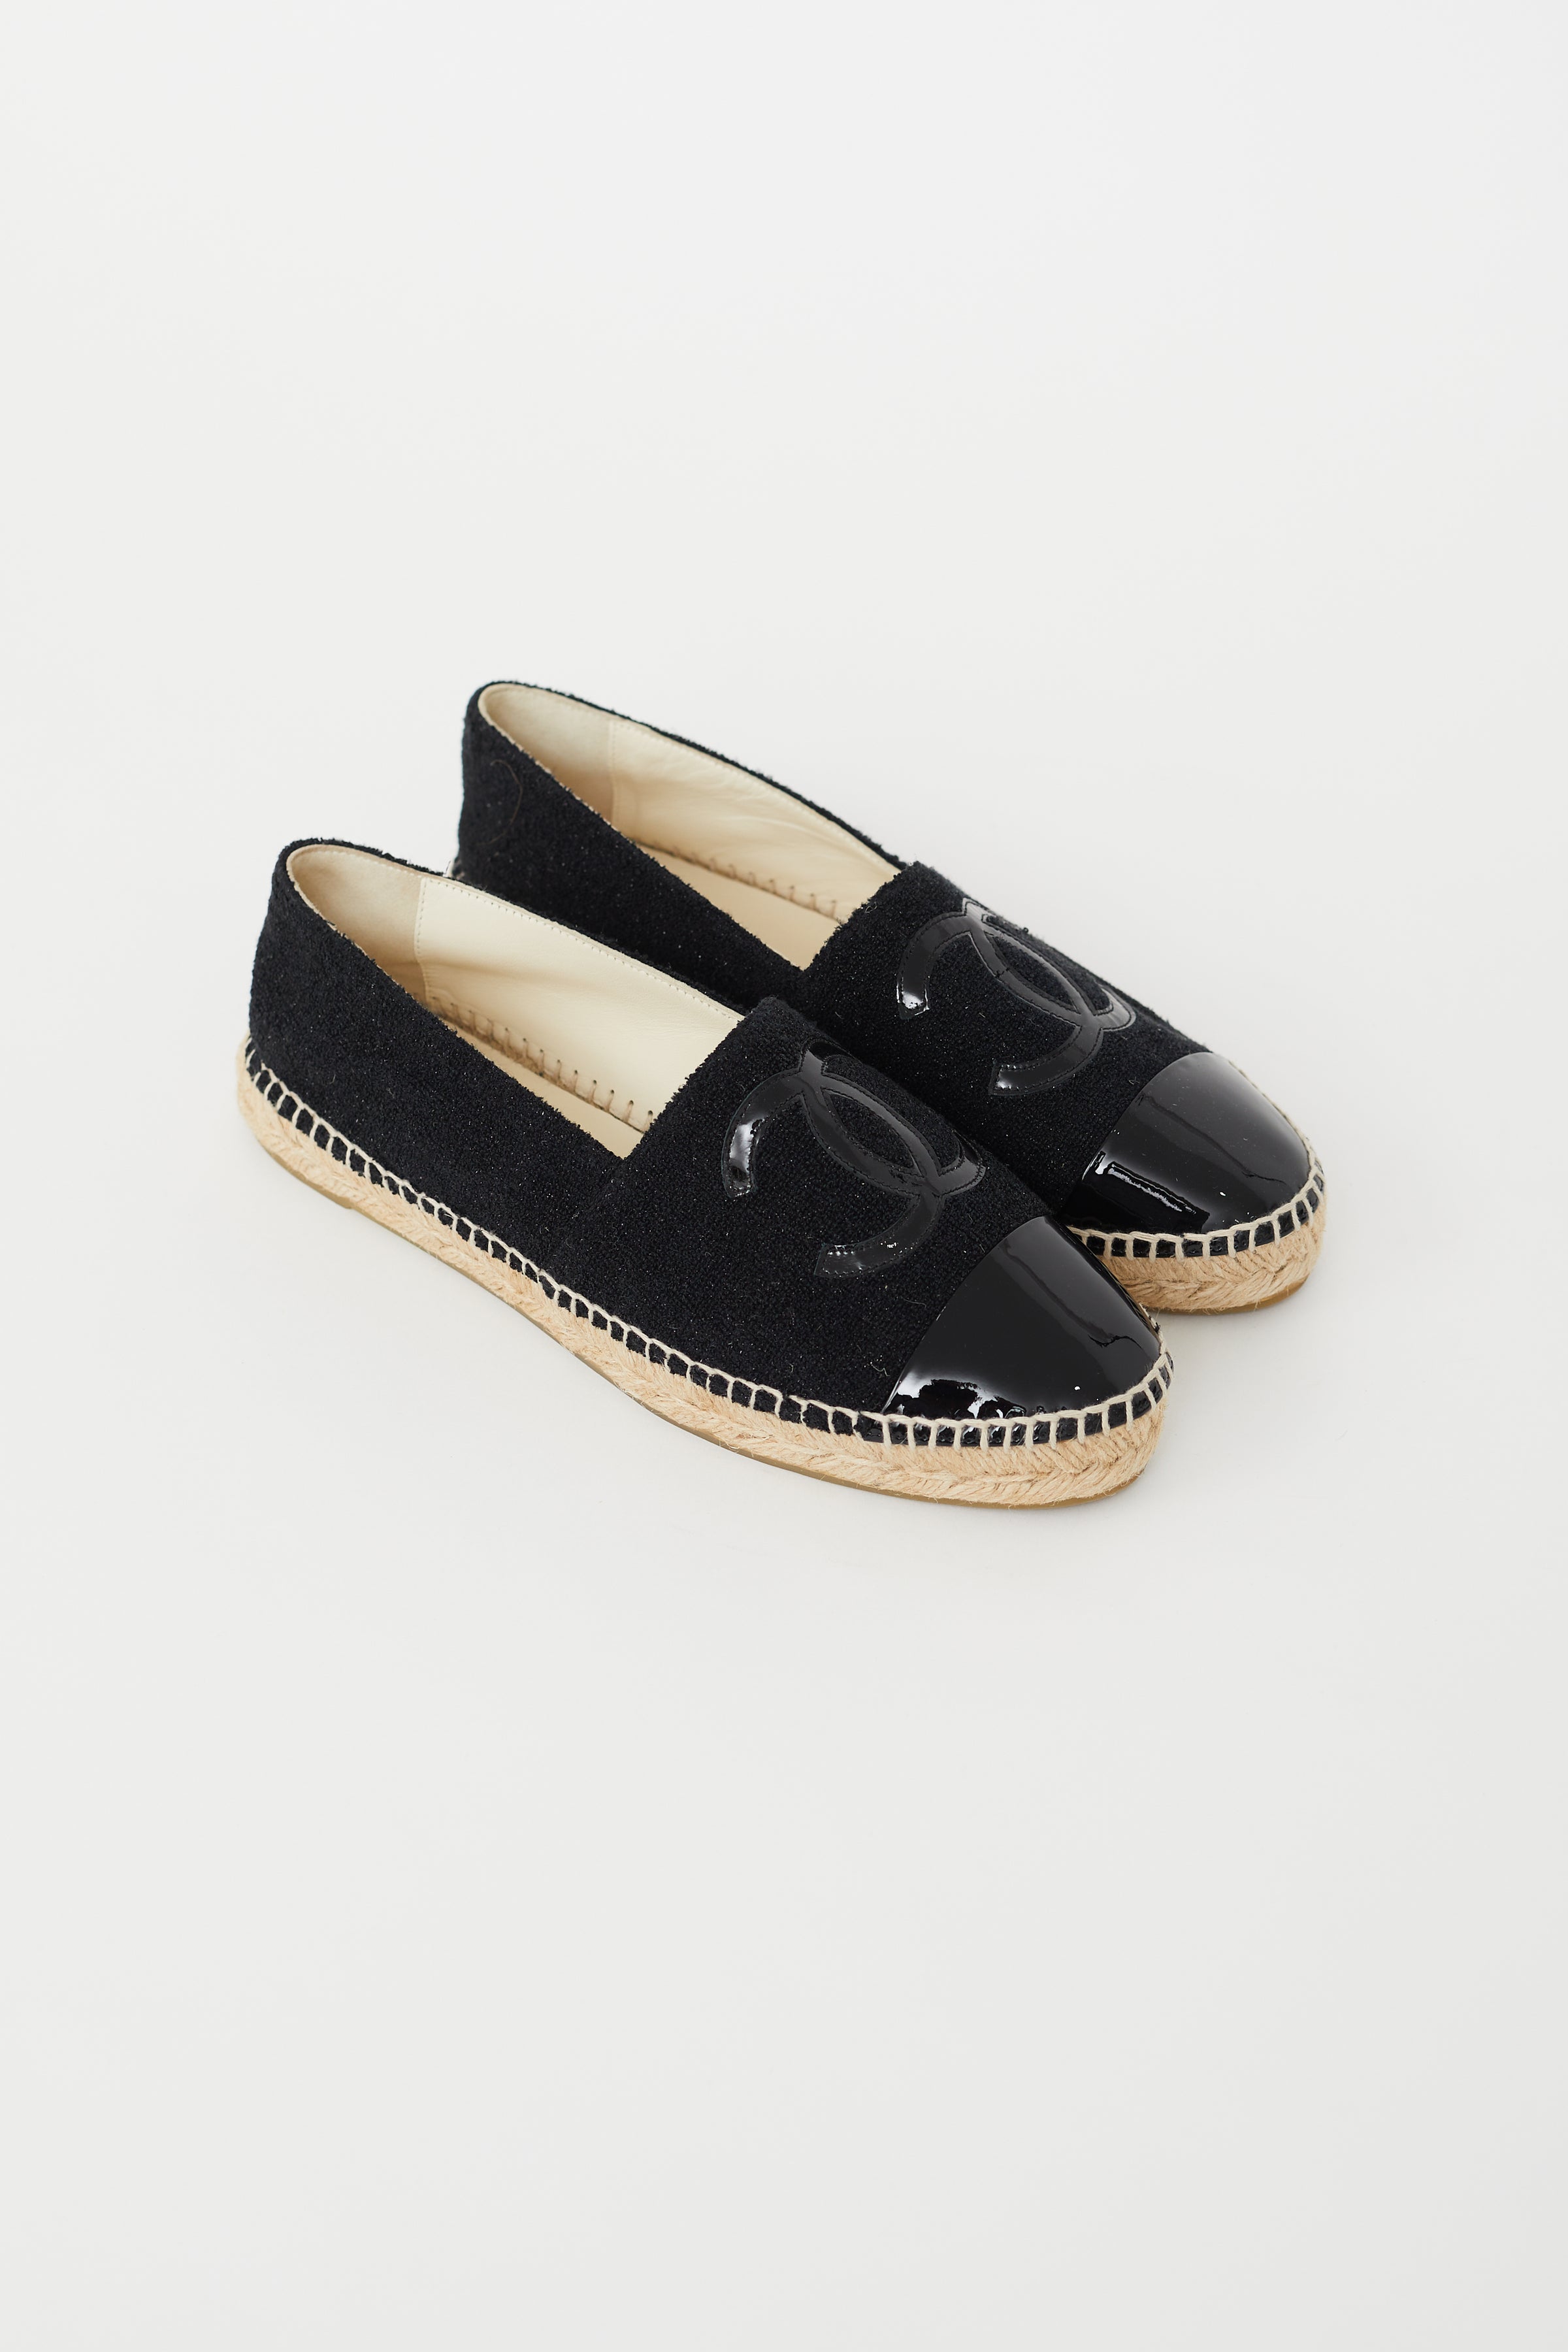 Chanel // Black & Patent Flat – Consignment